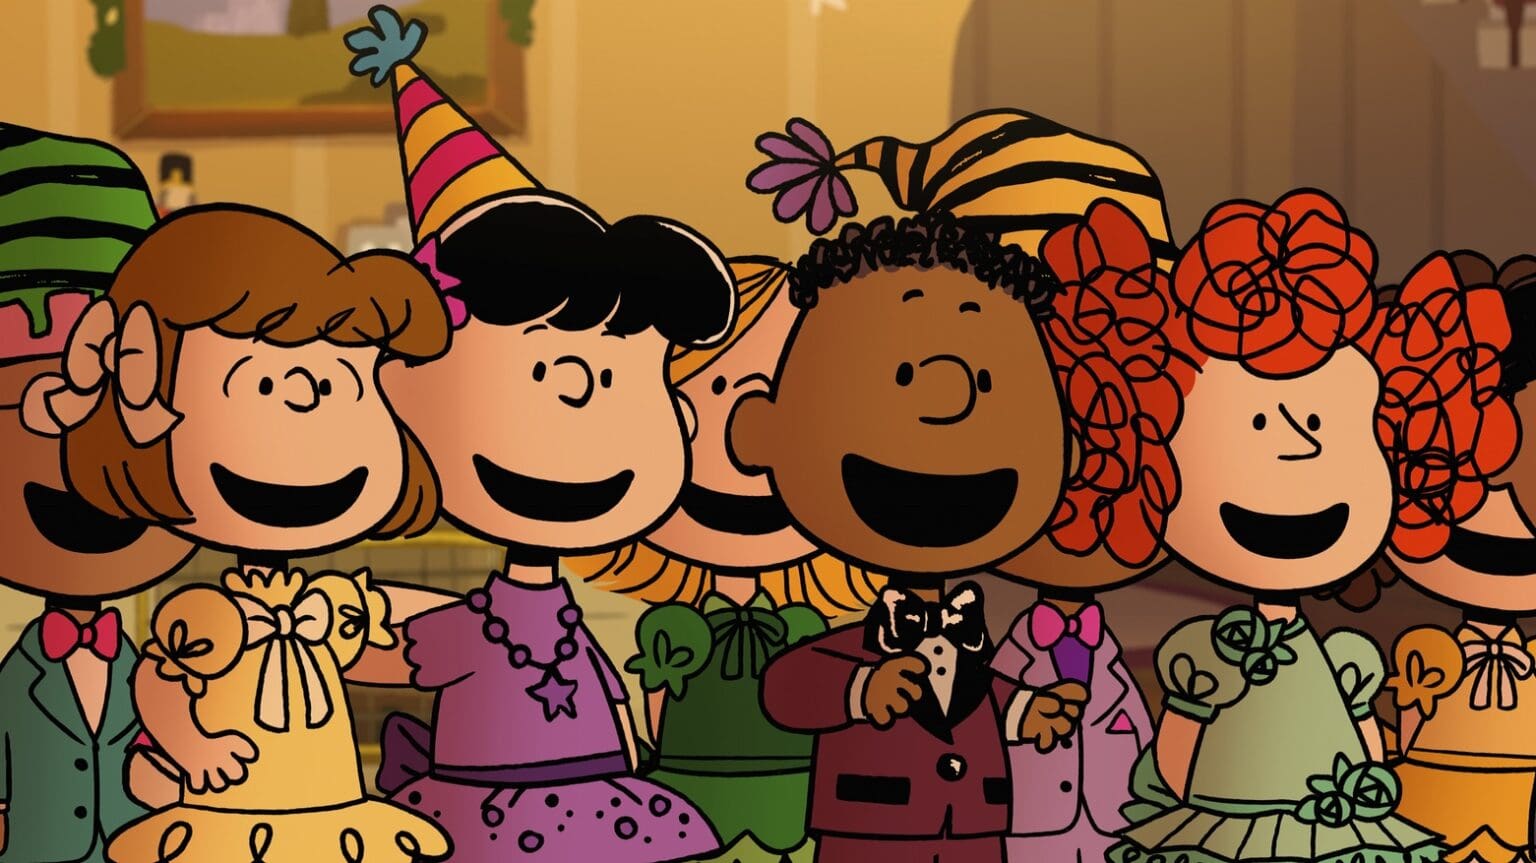 Lucy’s New Year’s Eve party bombs in trailer for new Peanuts special